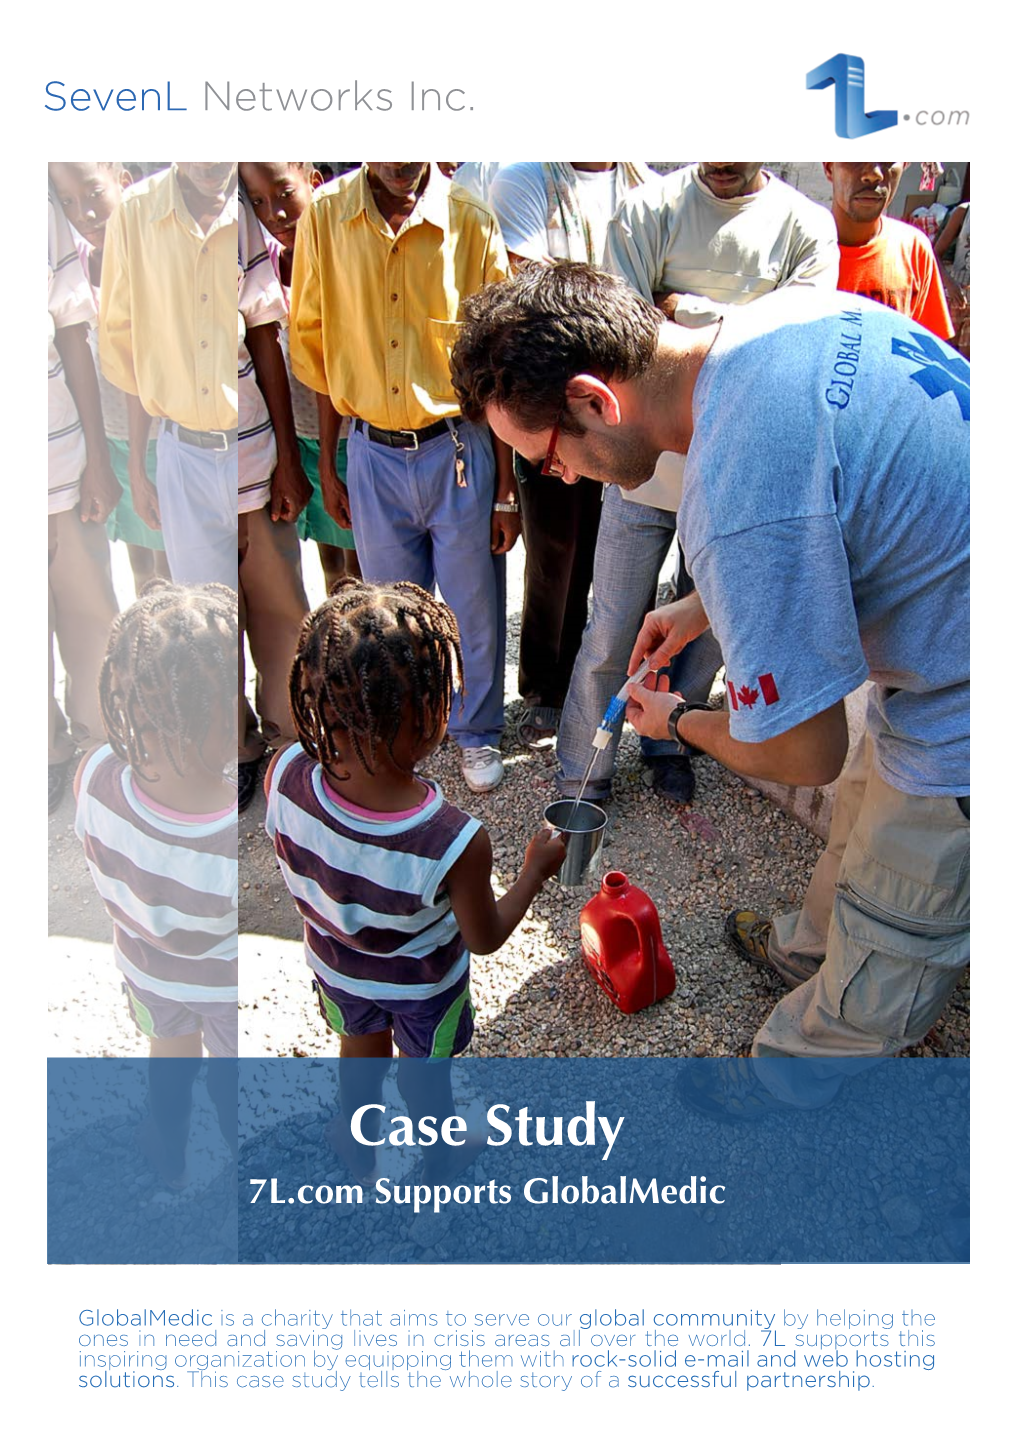 To Download the Case Study PDF File